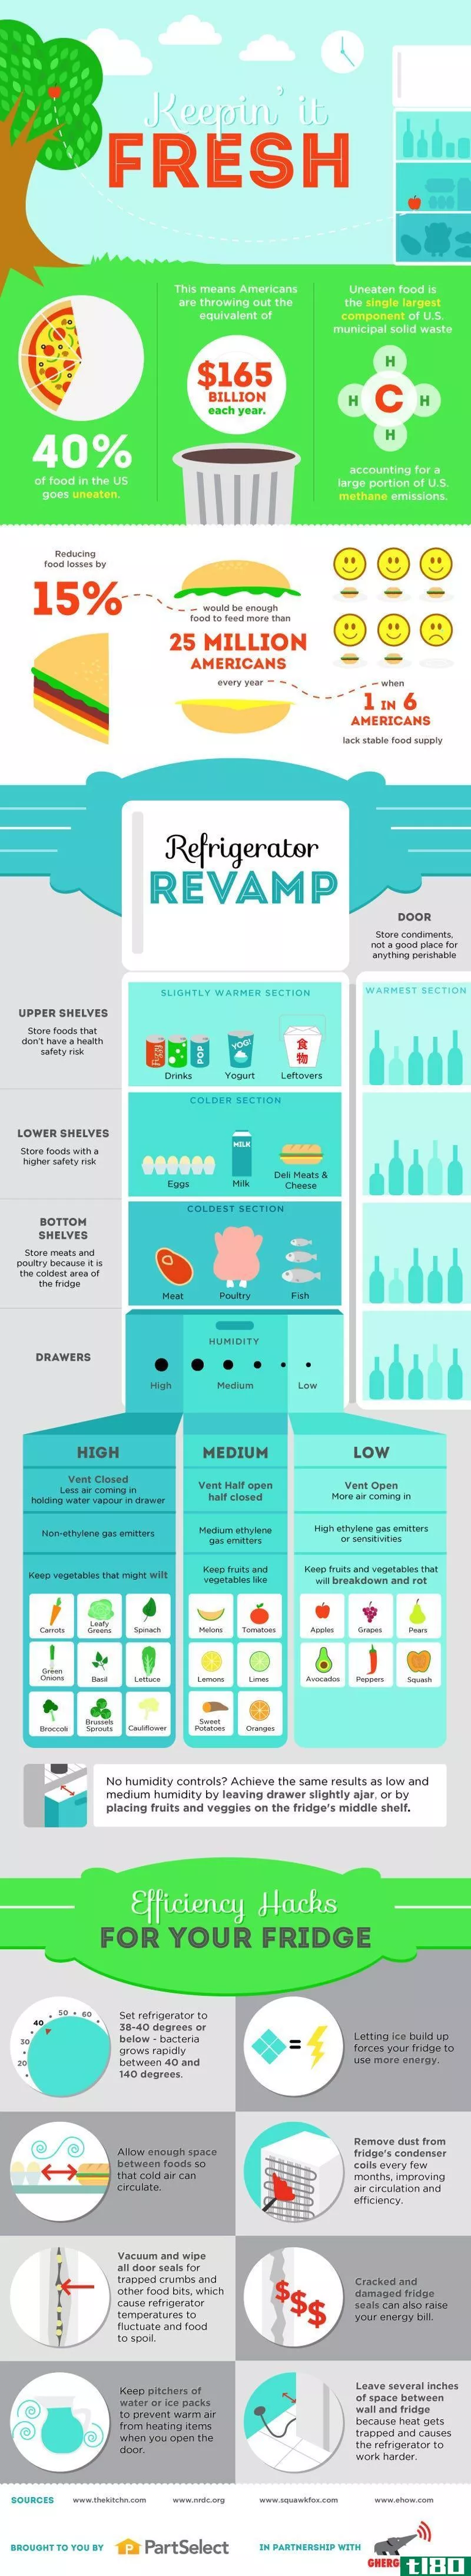 Illustration for article titled This Infographic Shows You How to Organize Your Fridge